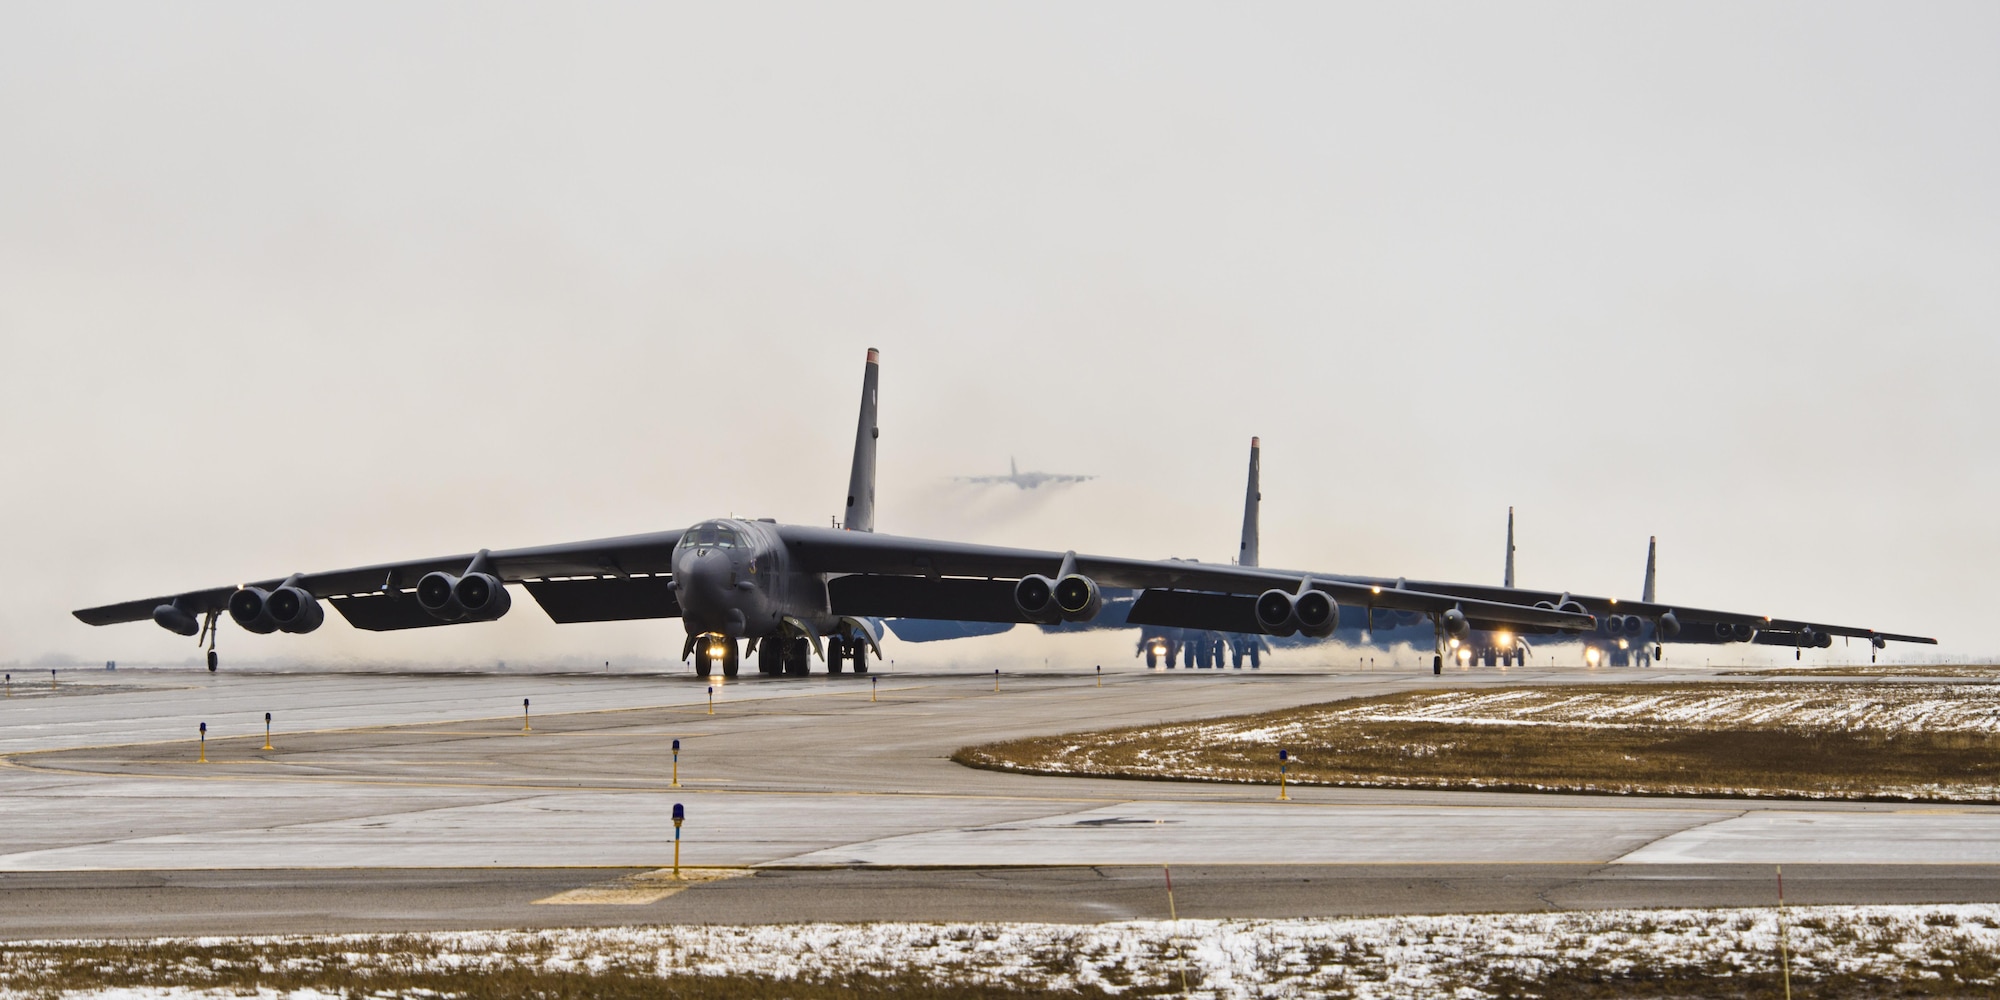 B-52H Stratofortresses taxi on the runway during Exercise Constant Vigilance at Minot Air Force Base, N.D., April 17, 2016. Air Force Global Strike Command conducts training operations and exercises on a regular basis to ensure our forces are ready to perform nuclear deterrence operations and long-range strike missions if and when called upon to do so. (U.S. Air Force photo/Airman 1st Class J.T. Armstrong)